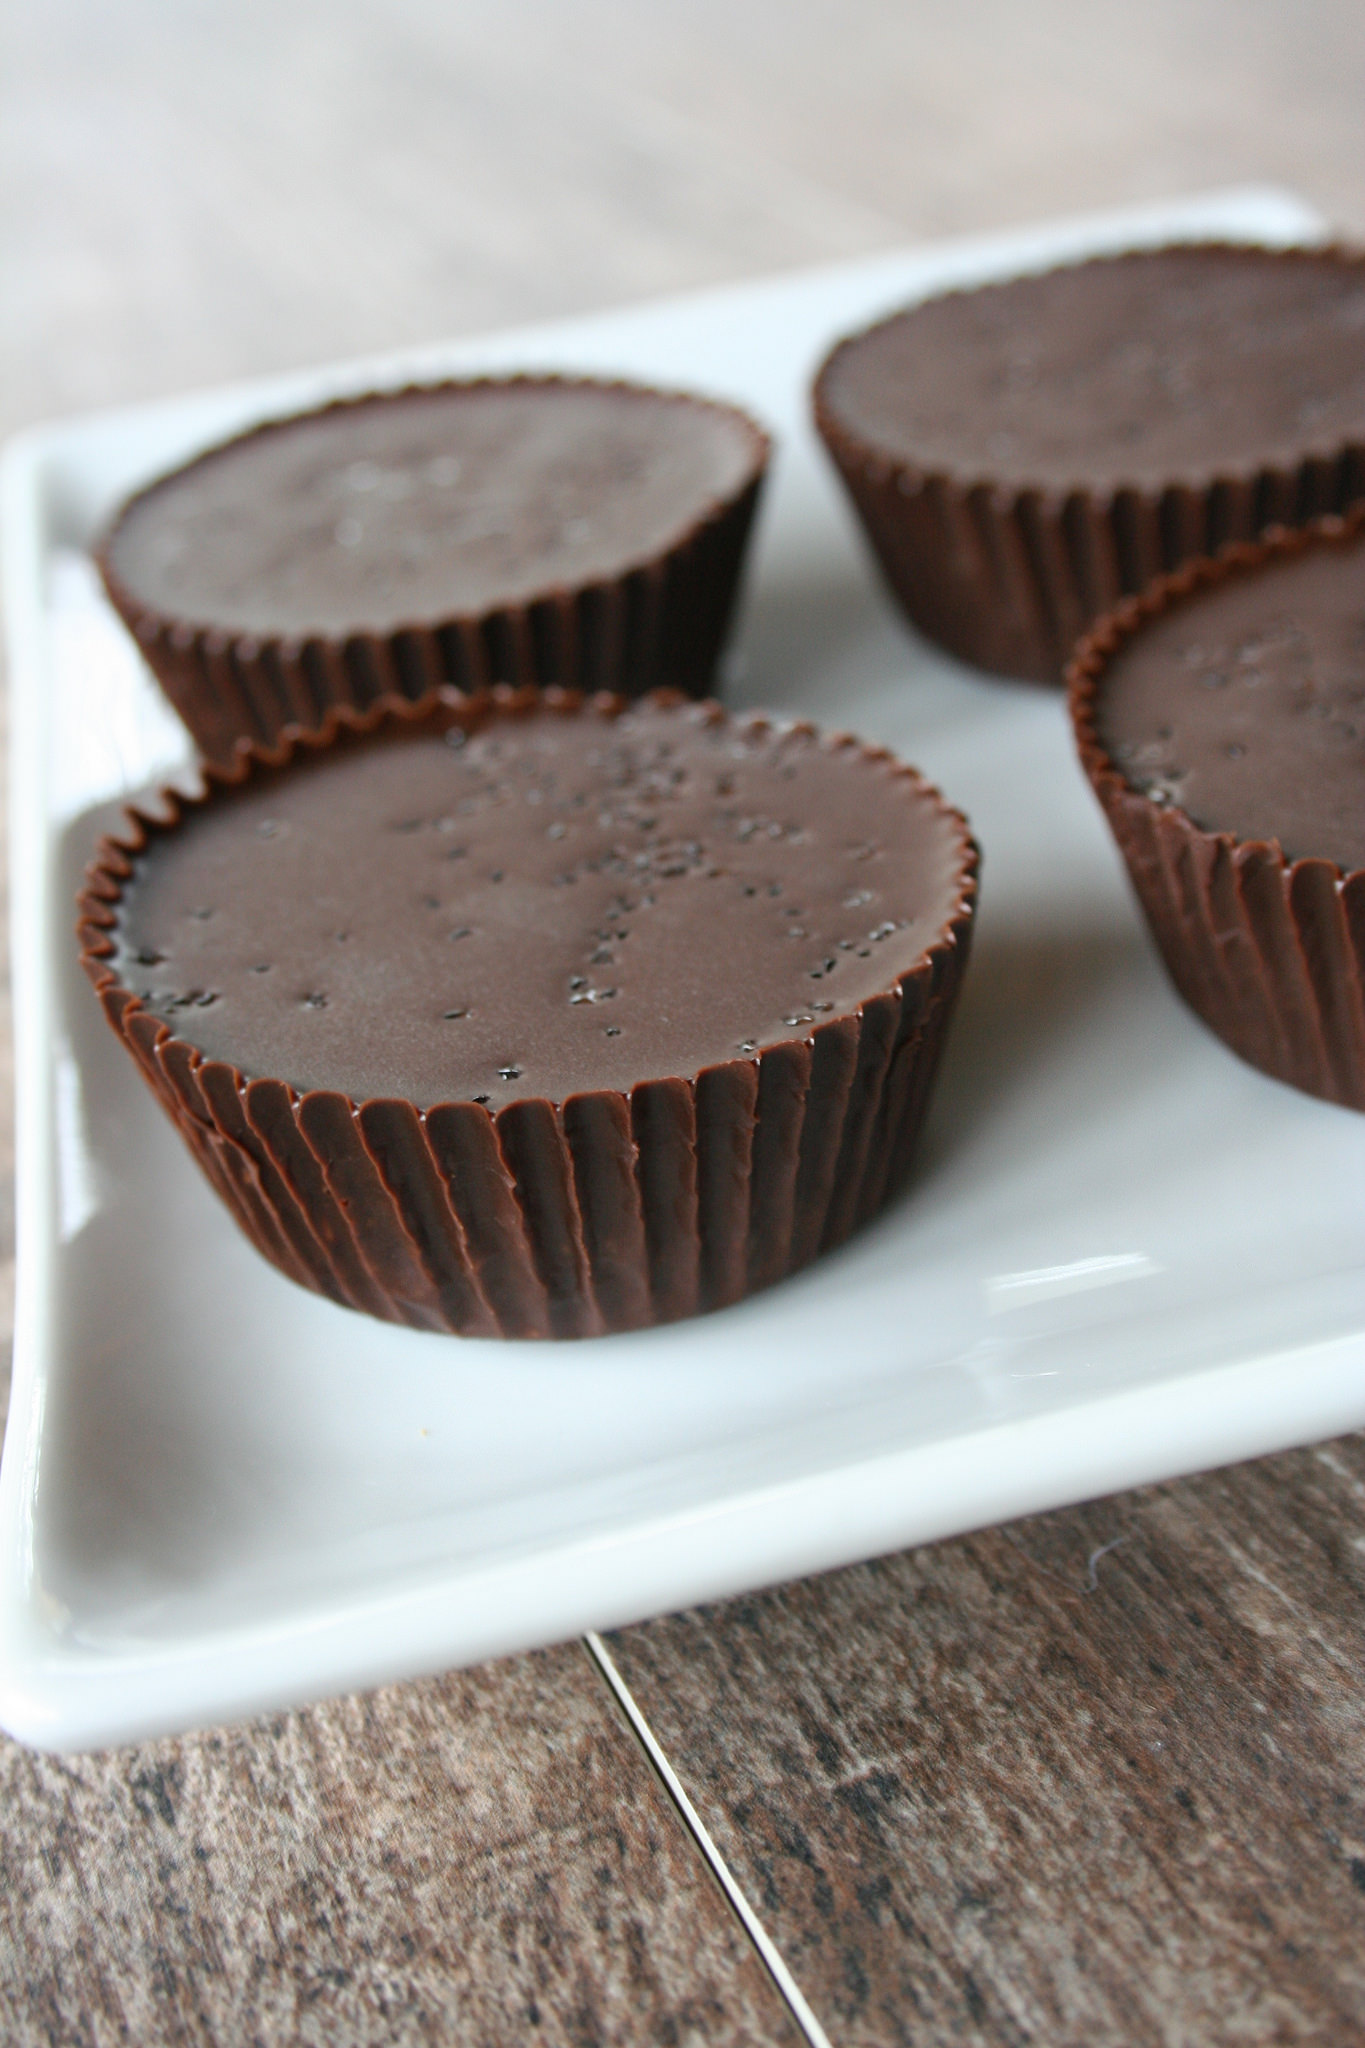 Salted chocolate cups